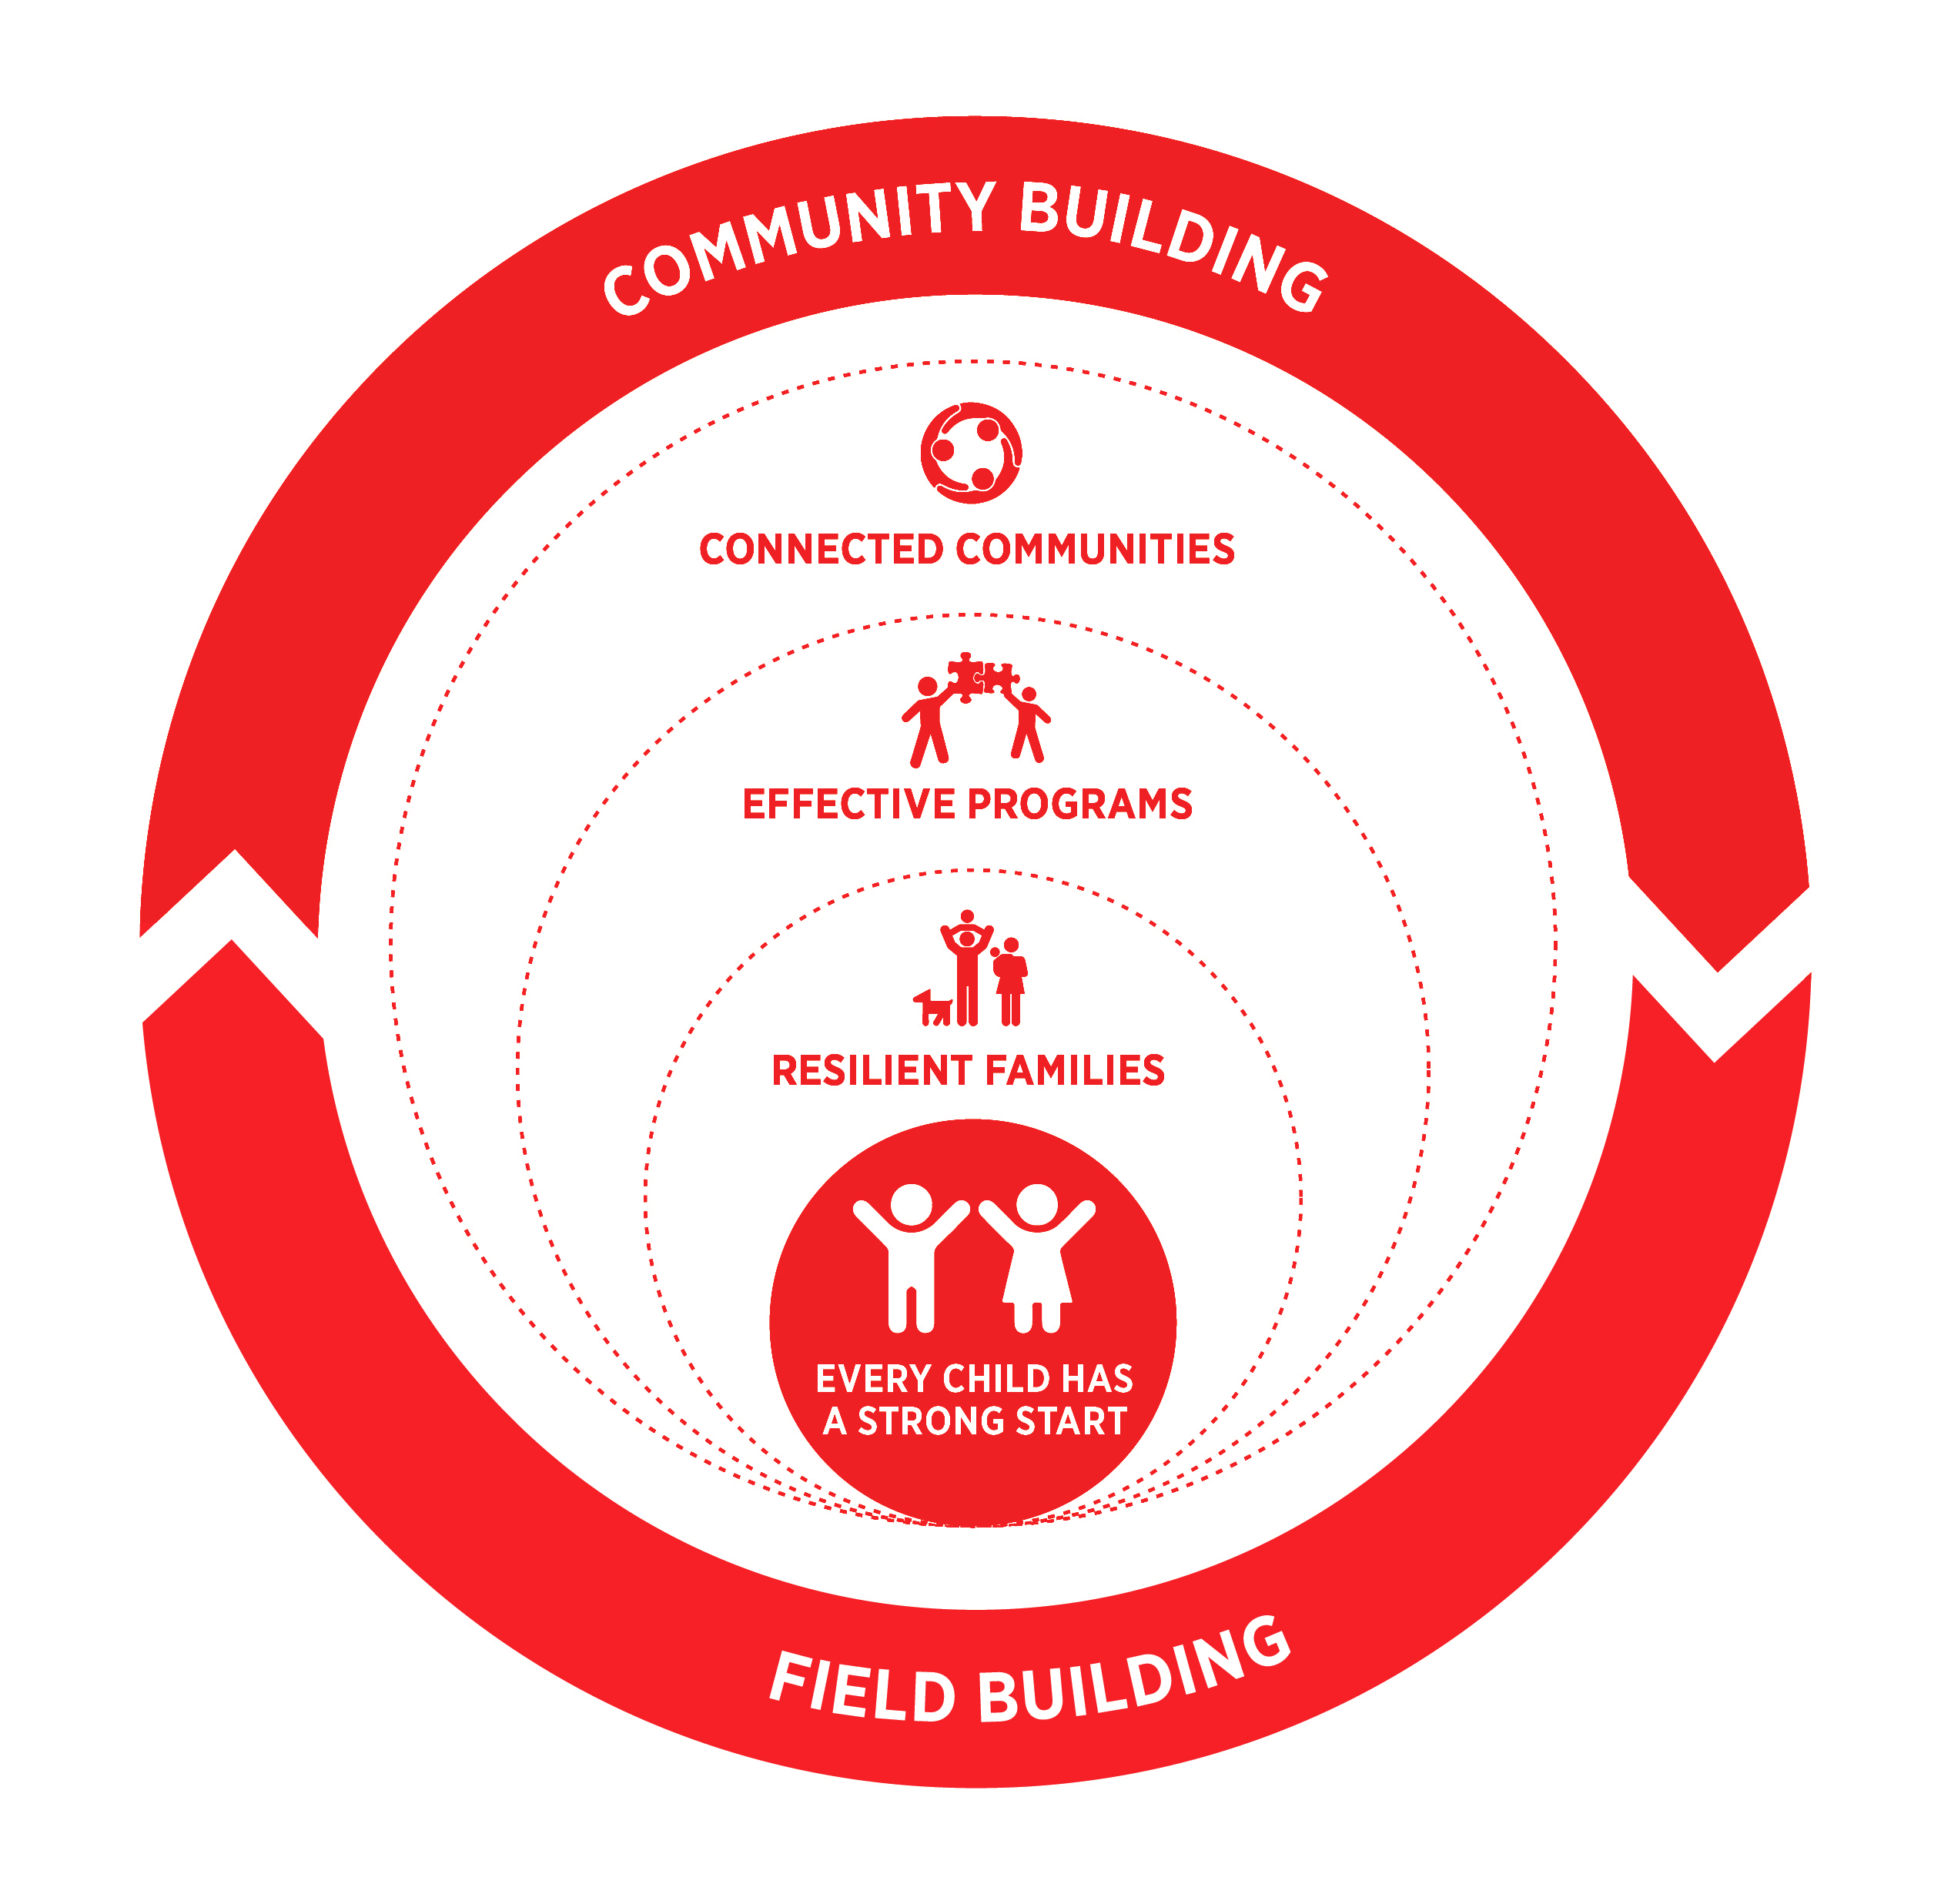 Vanguard invests in resilient families, effective programs, and connected communities to achieve the goal of more children becoming school-ready.